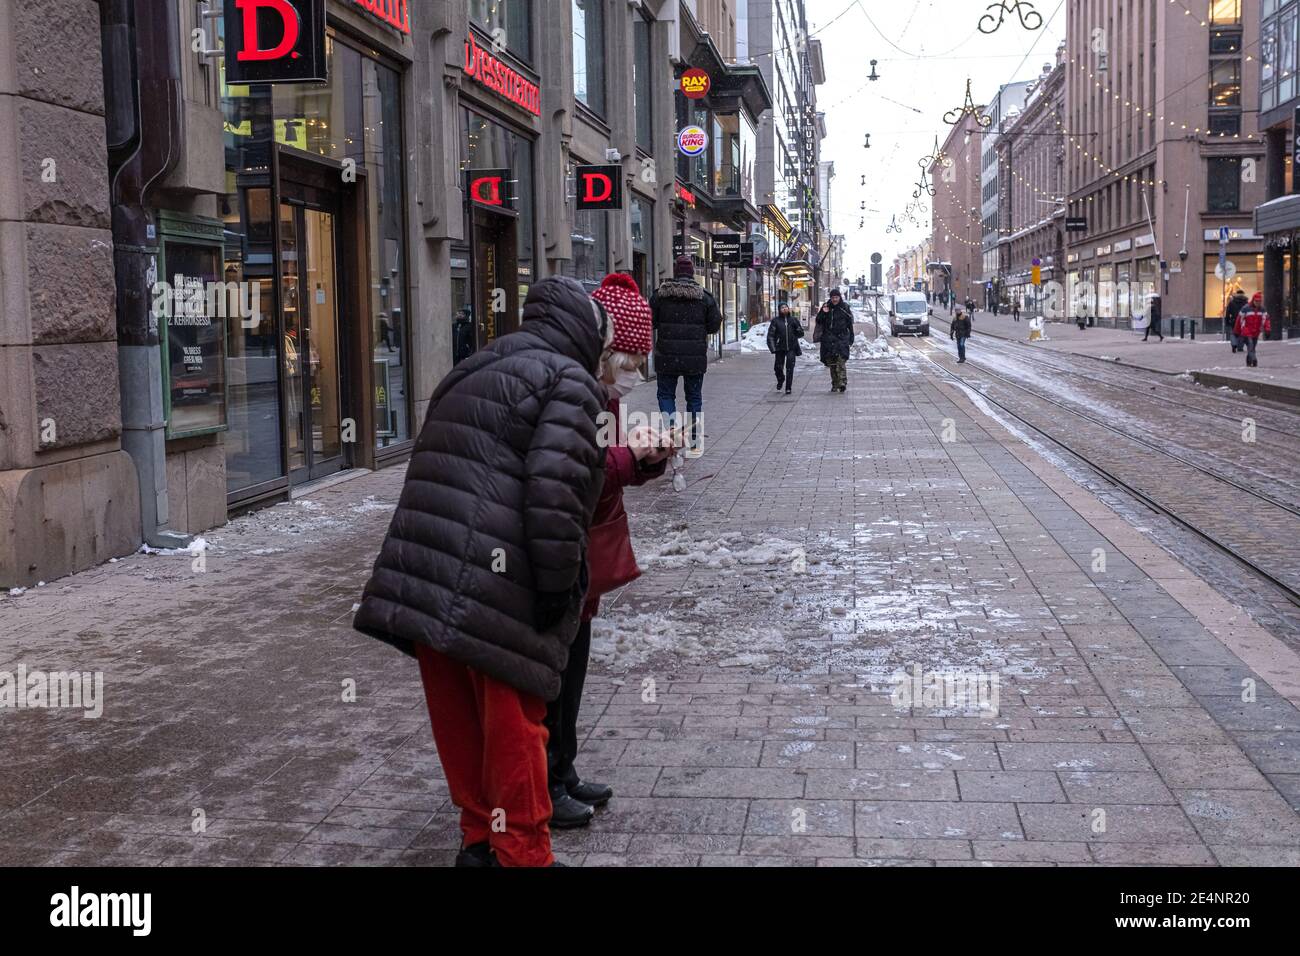 Helsinki. Finland. January 19, 2021 Two girlfriends are on the street, older women take a selfie. High quality photo Stock Photo